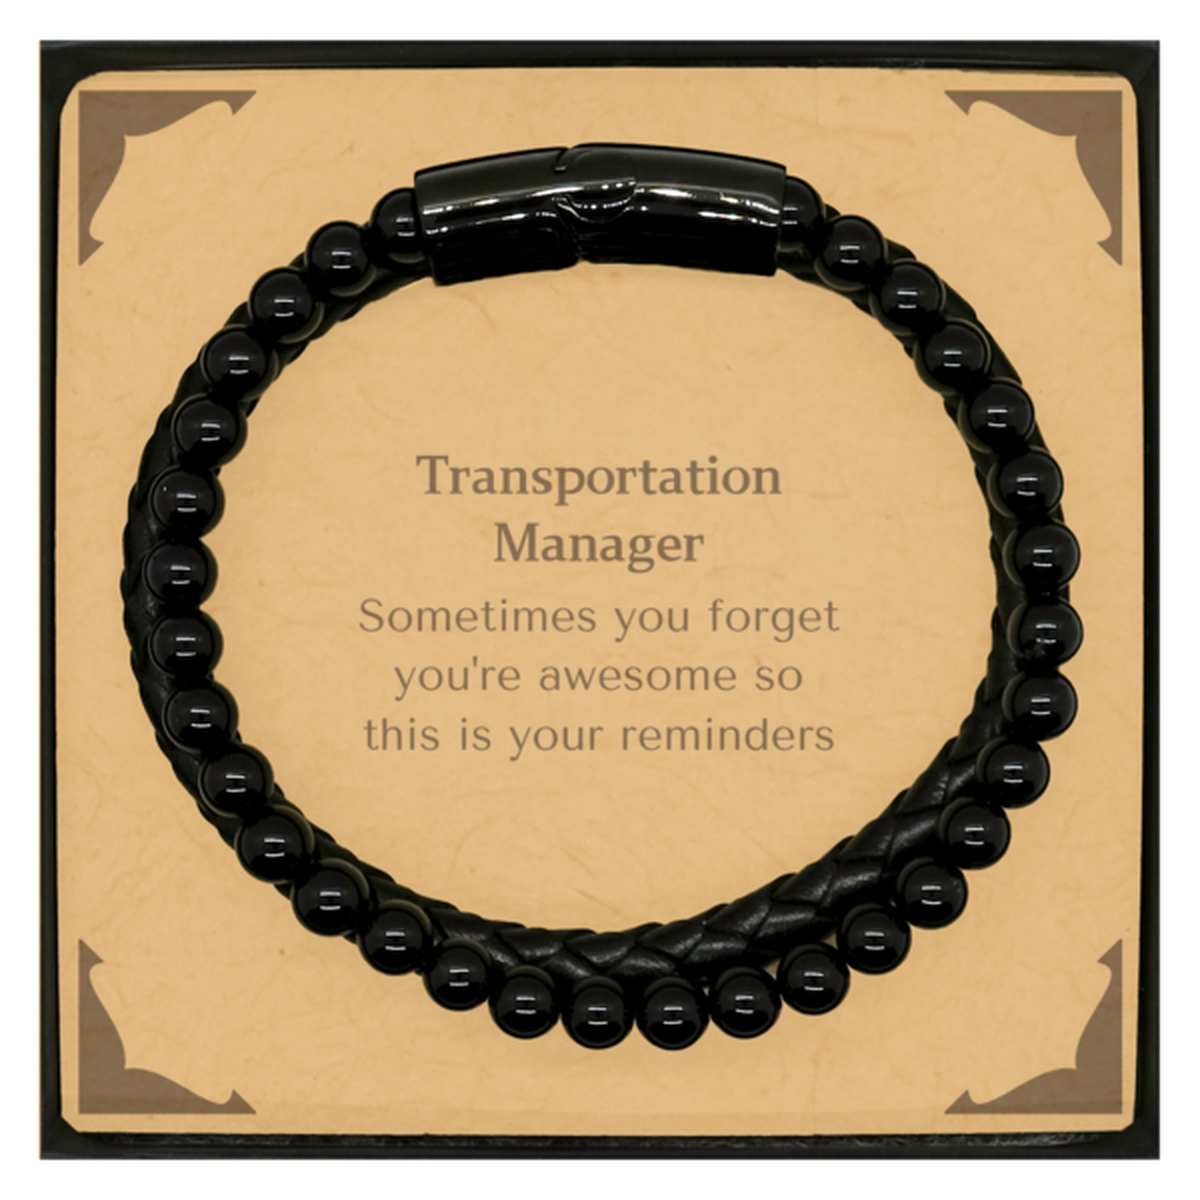 Sentimental Transportation Manager Stone Leather Bracelets, Transportation Manager Sometimes you forget you're awesome so this is your reminders, Graduation Christmas Birthday Gifts for Transportation Manager, Men, Women, Coworkers